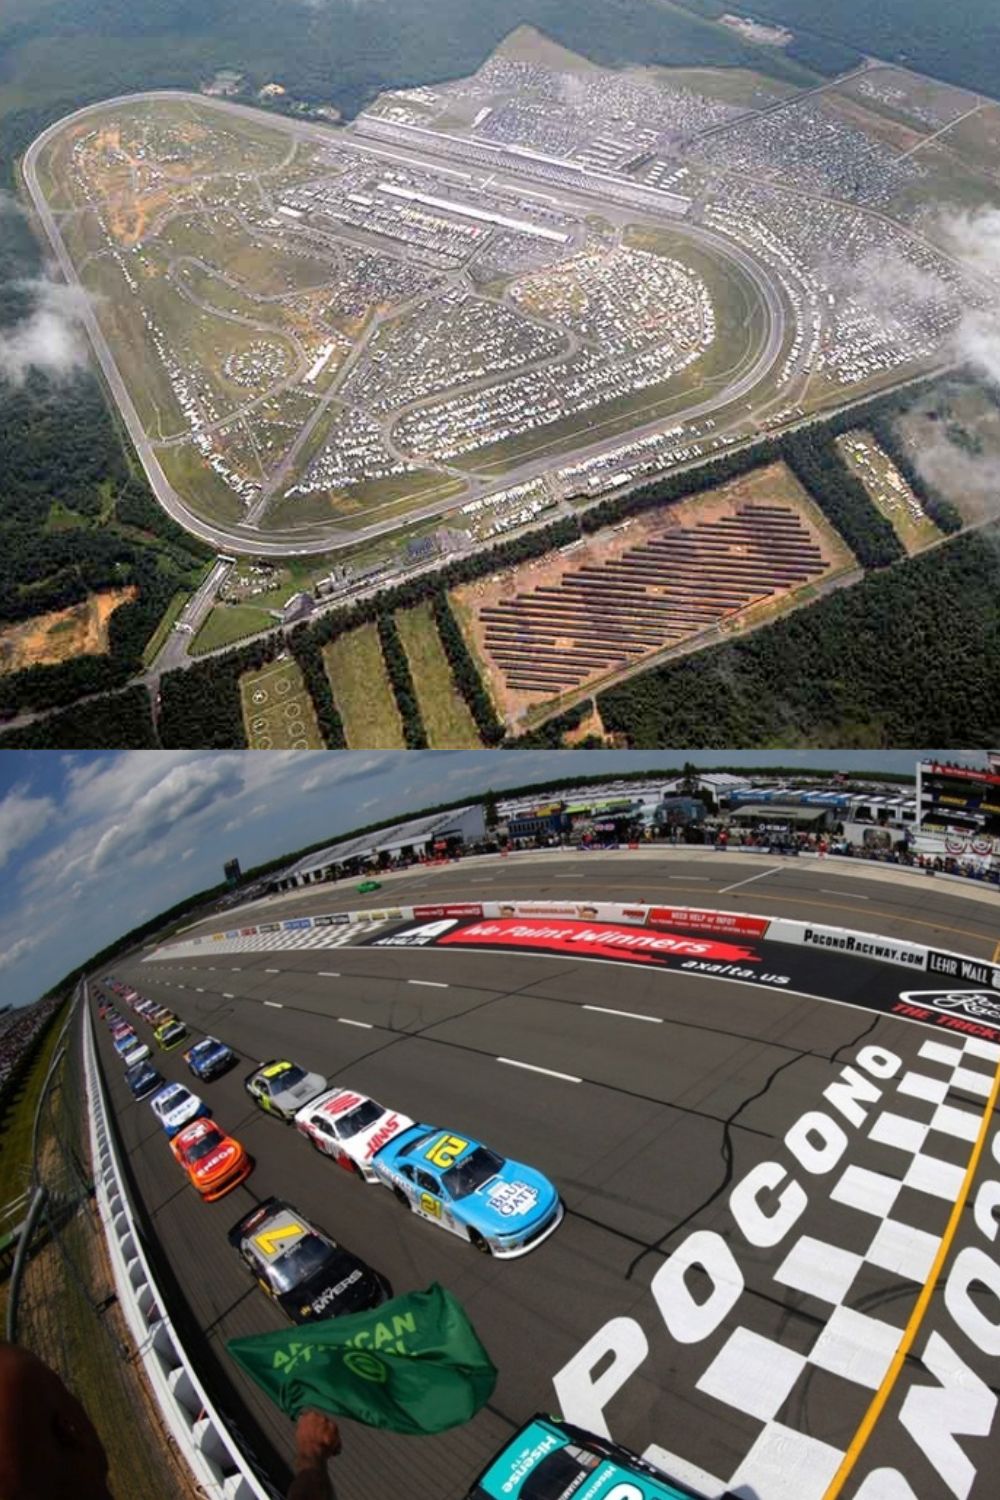 Pocono Raceway Is The Most Unsual Race Track Among Other Racetracks